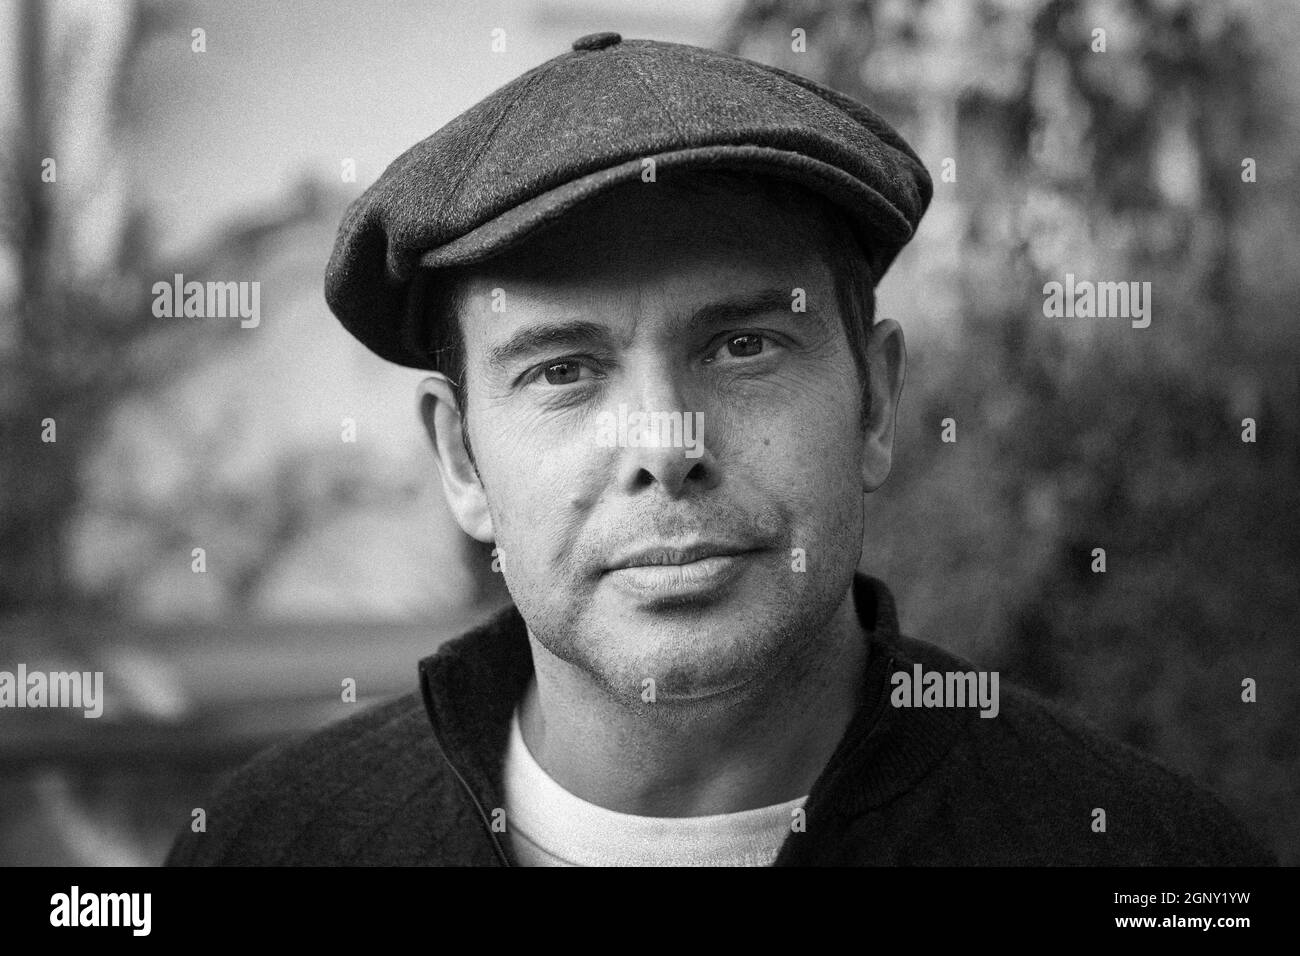 Portrait of good looking man with flat cap Stock Photo